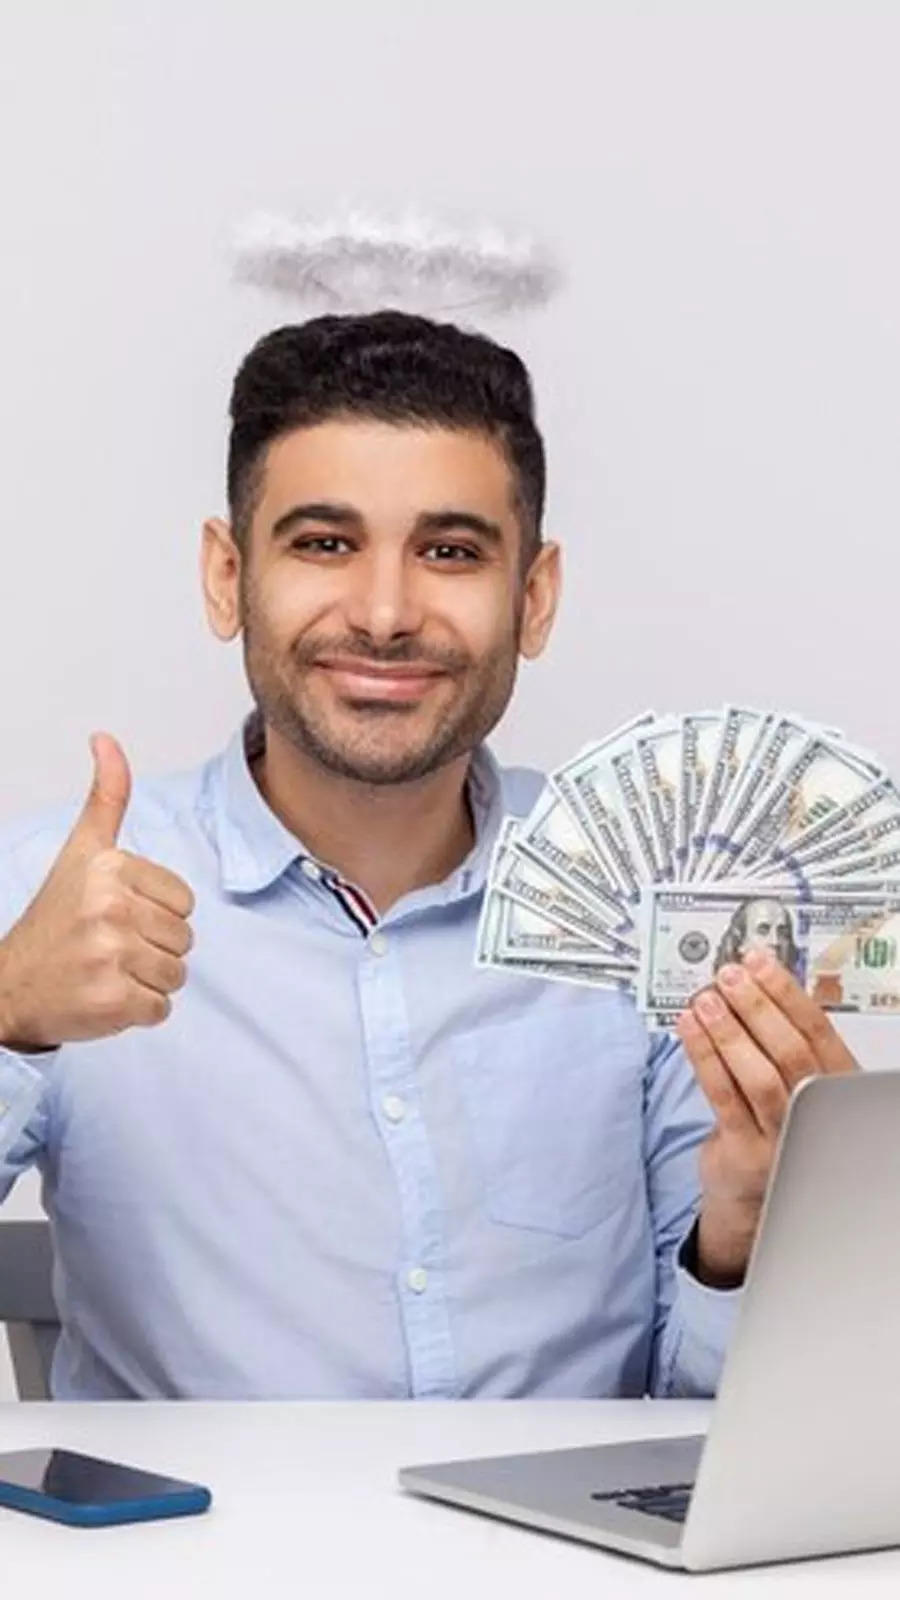 How To Make Money Online: 13 Best Ideas You Must Explore | Times Of India